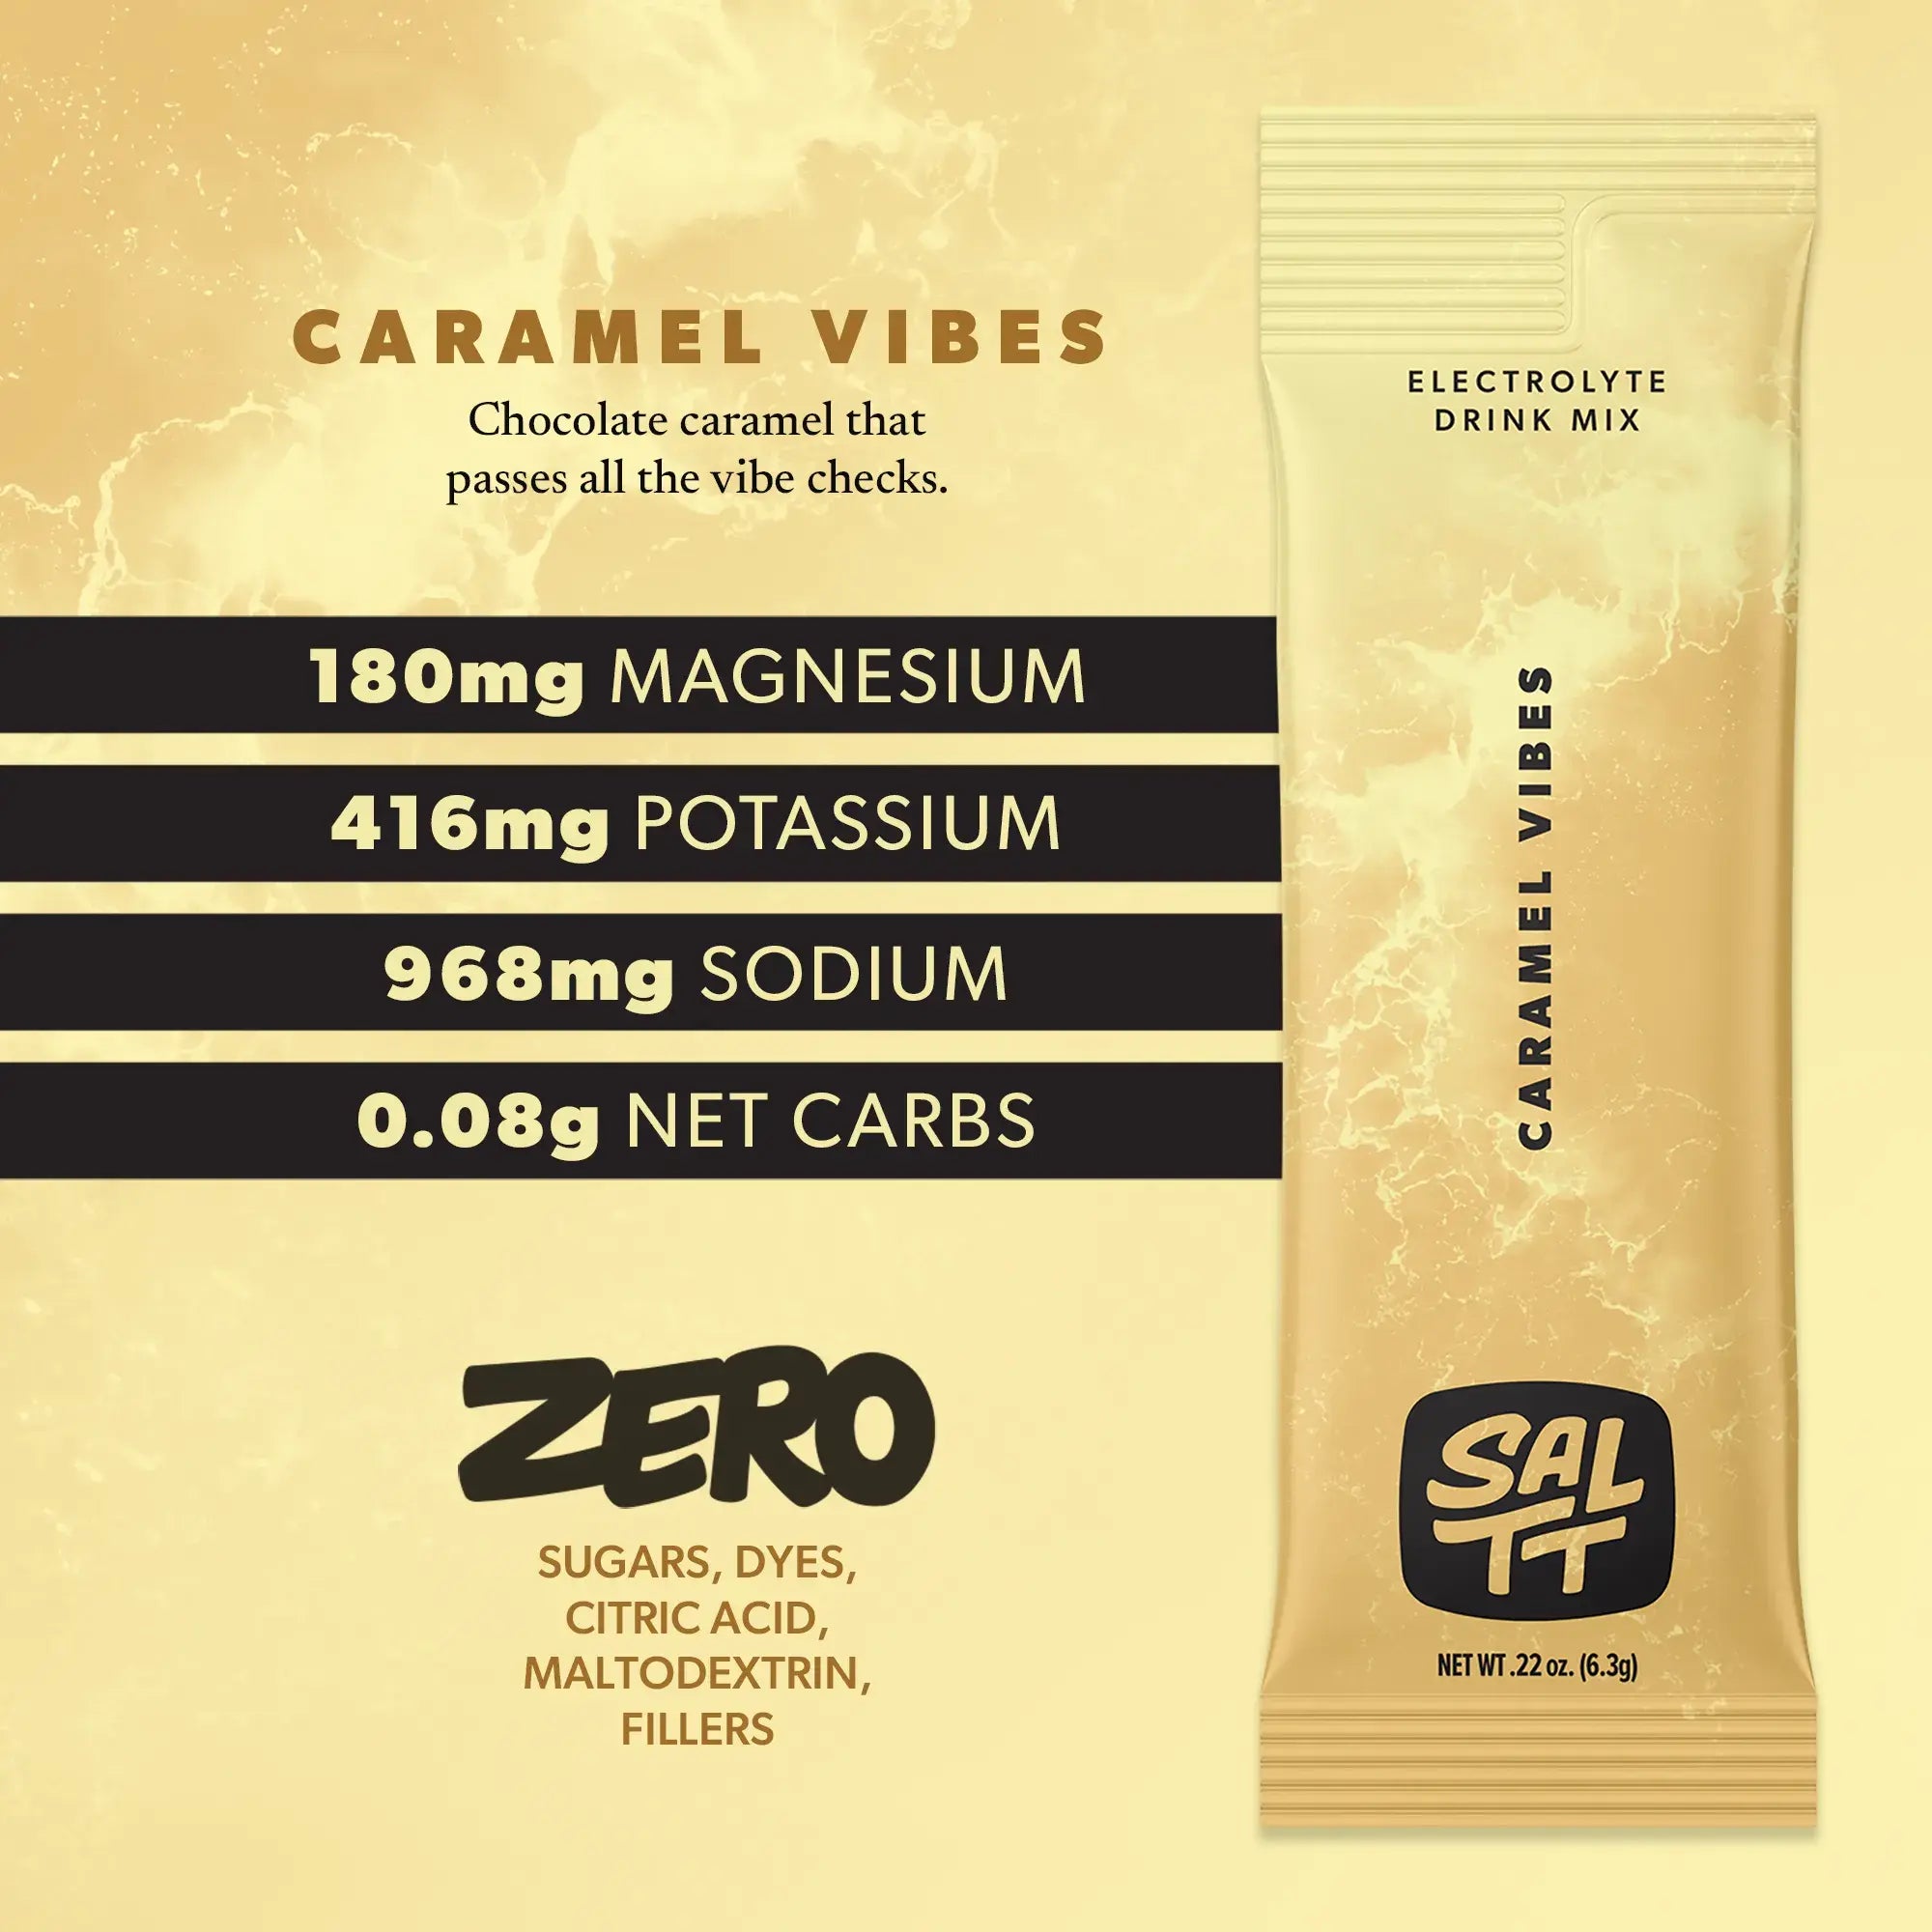 Nutrition for Caramel Vibes flavor. Caramel Vibes has 180mg Magnesium, 416mg Potassium, 968mg Sodium, 0.08g net carbs. Zero sugars, dyes, citric acid, maltodextrin, or fillers. See nutrition dropdown for complete supplement facts.